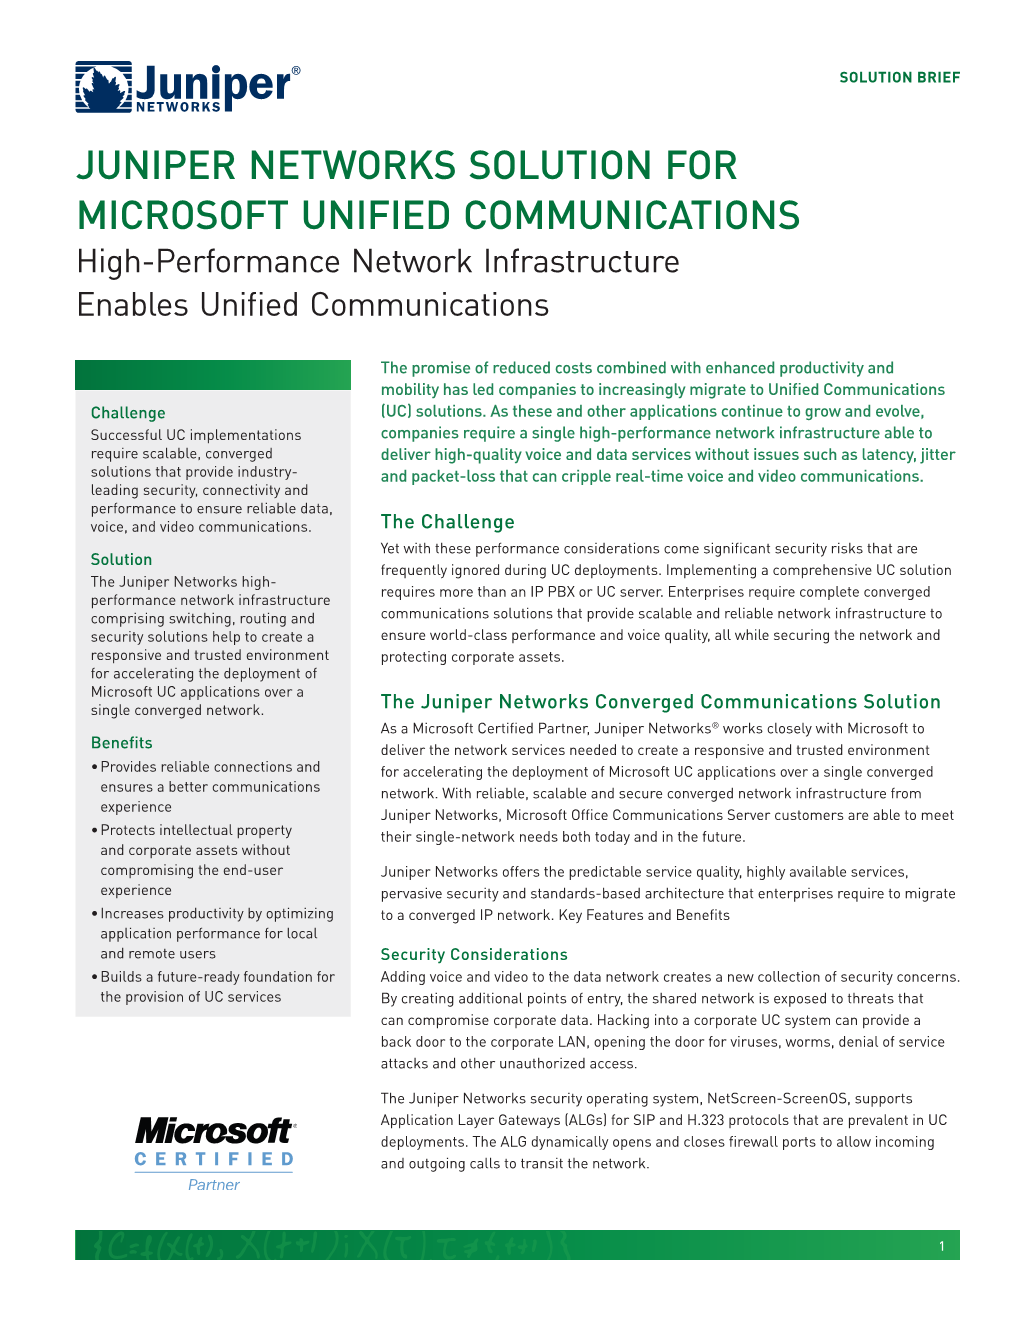 Juniper Networks Solution for Microsoft Unified Communications High-Performance Network Infrastructure Enables Unified Communications